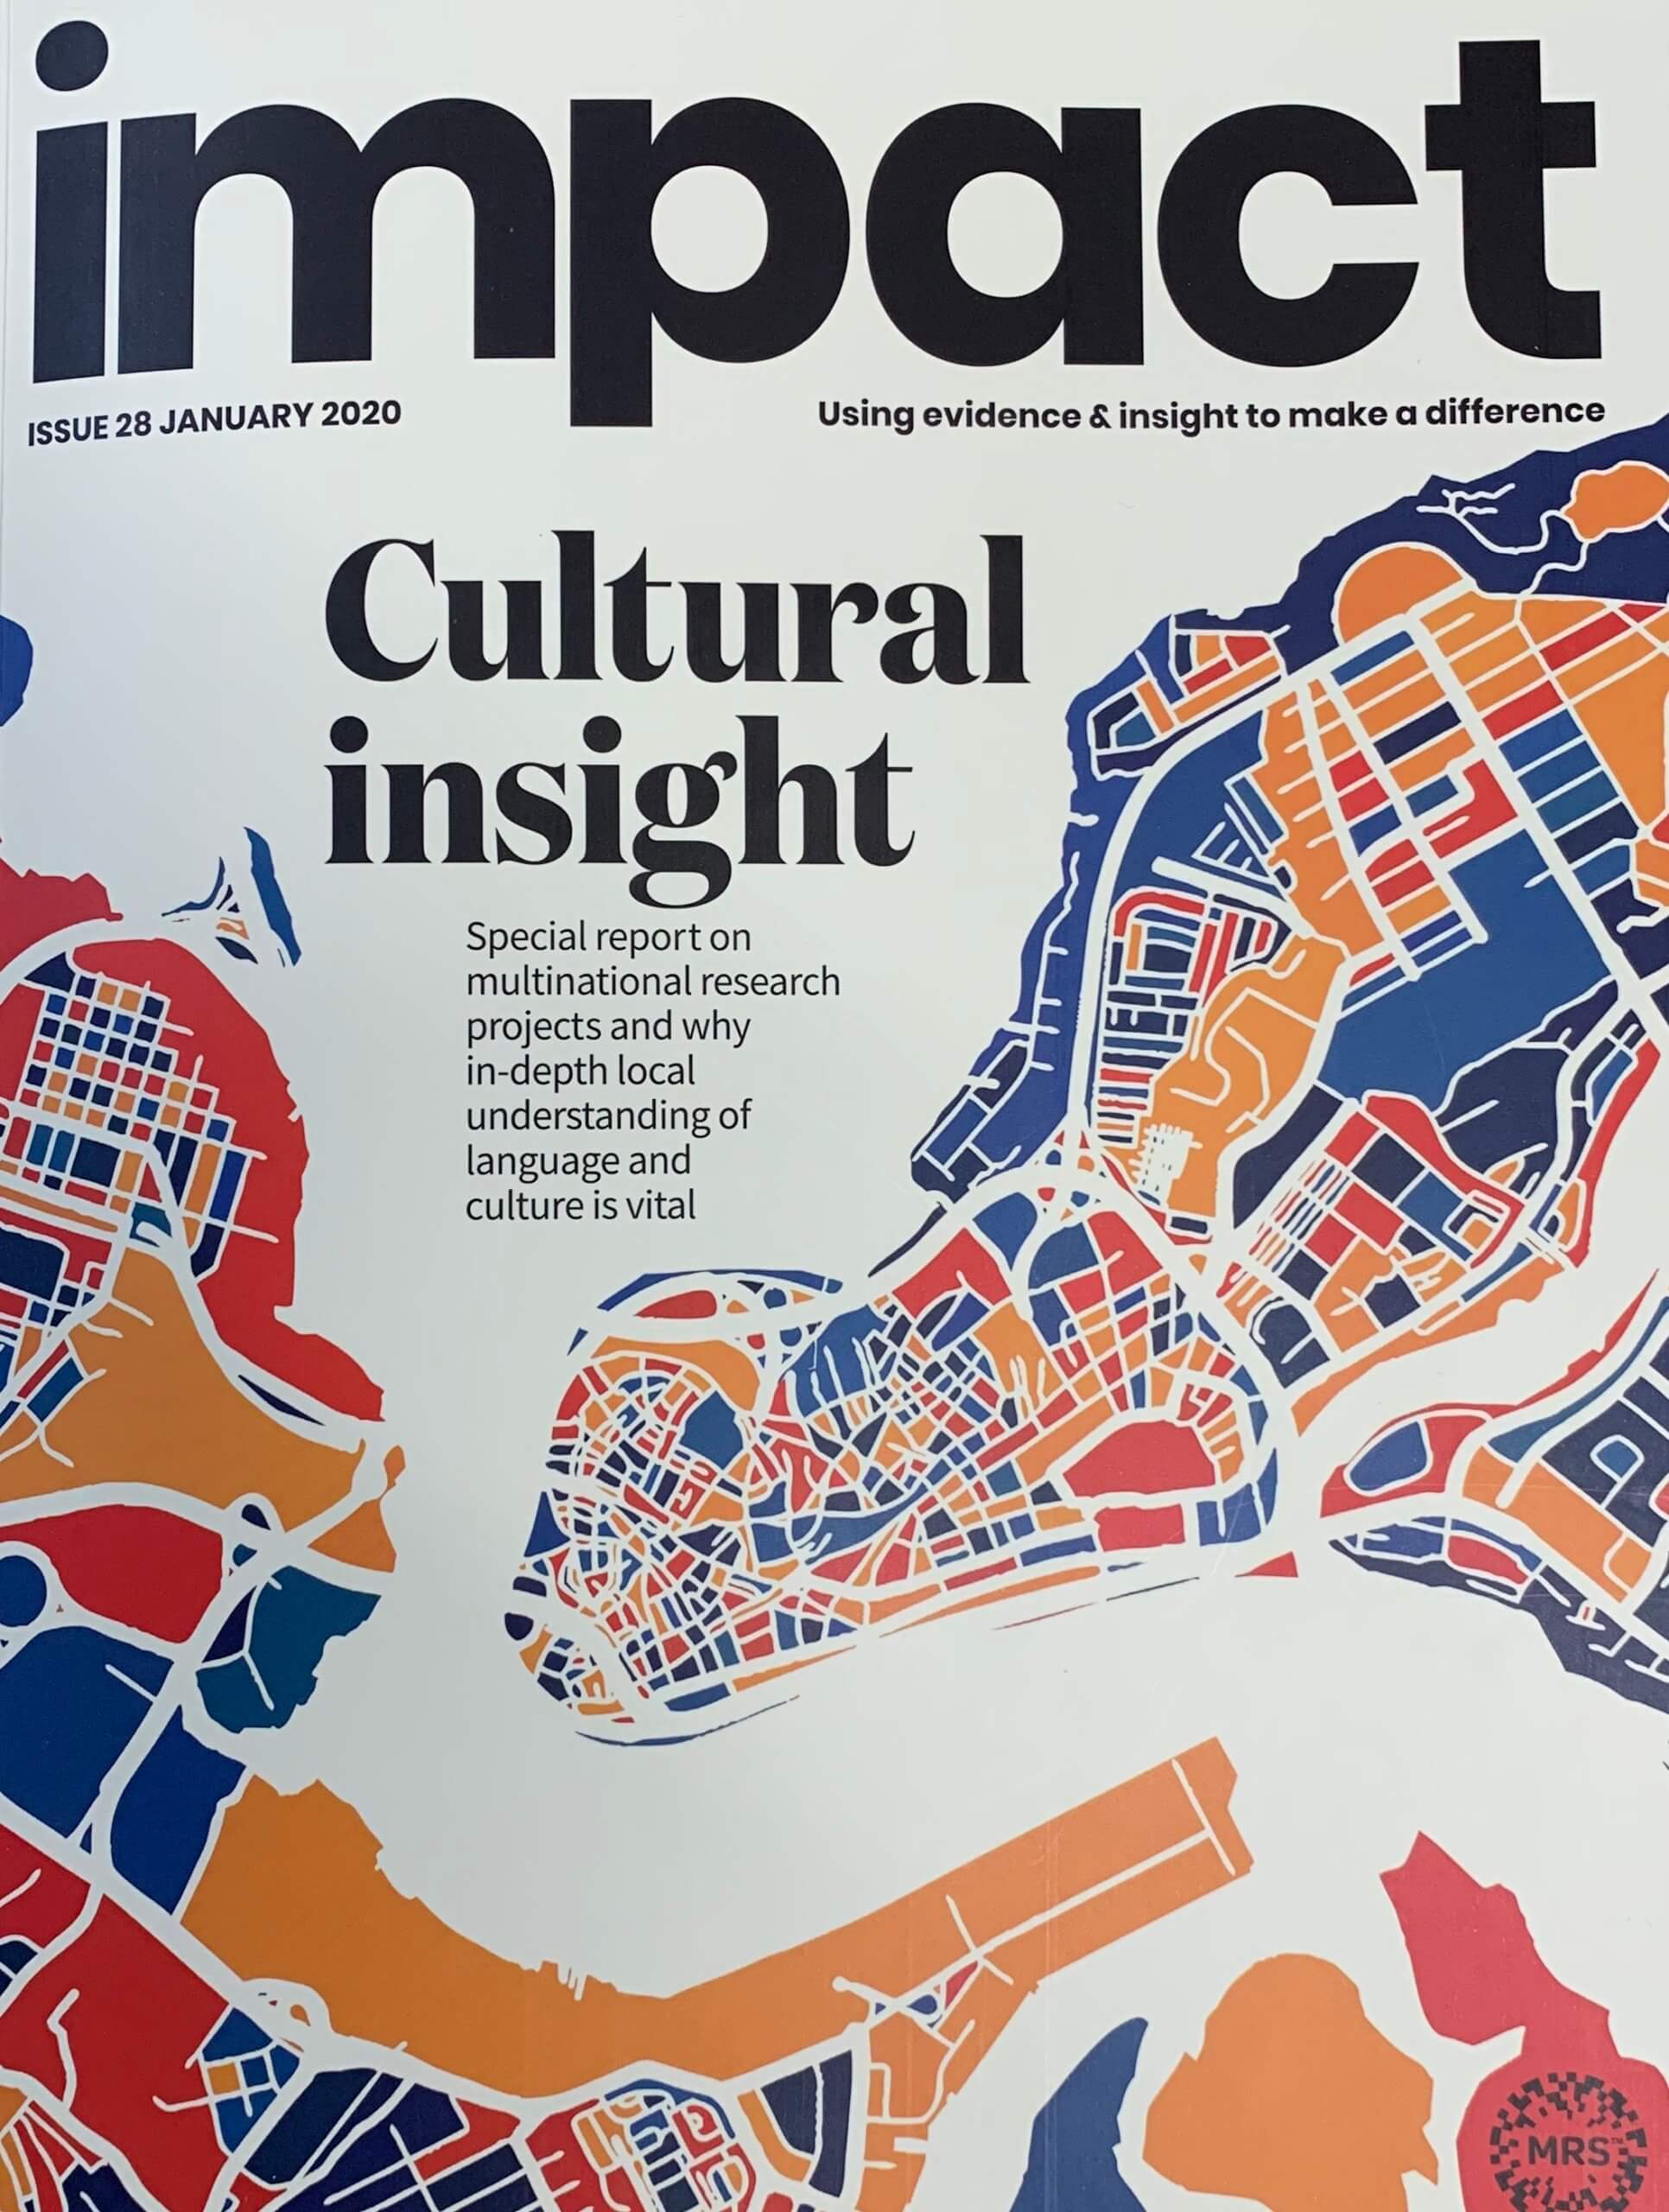 Cultural insight with Impact: